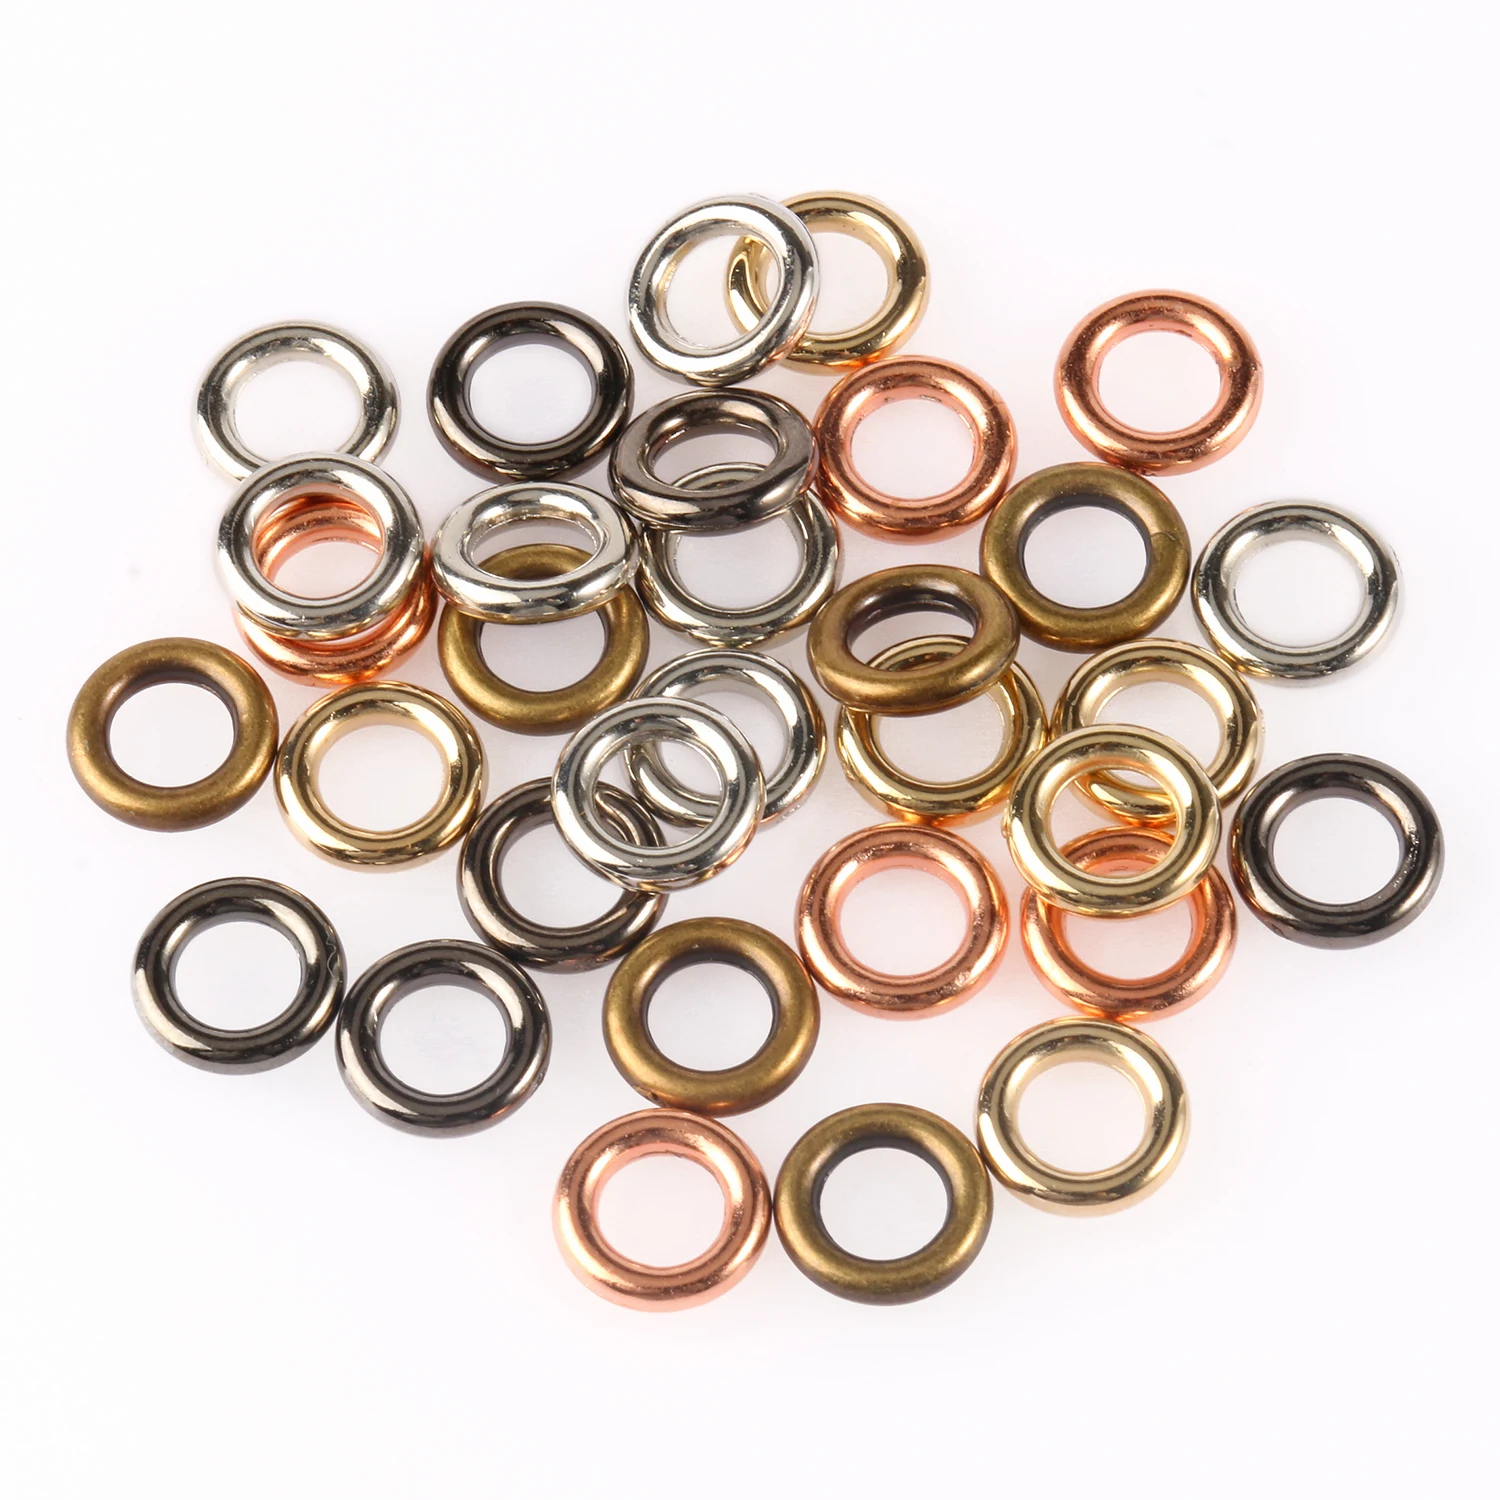 500-50pcs Plate Gold/Silver Color Circle CCB Spacer Beads Closed Rings Earring Hoops For Jewelry Making DIY Necklaces Bracelets